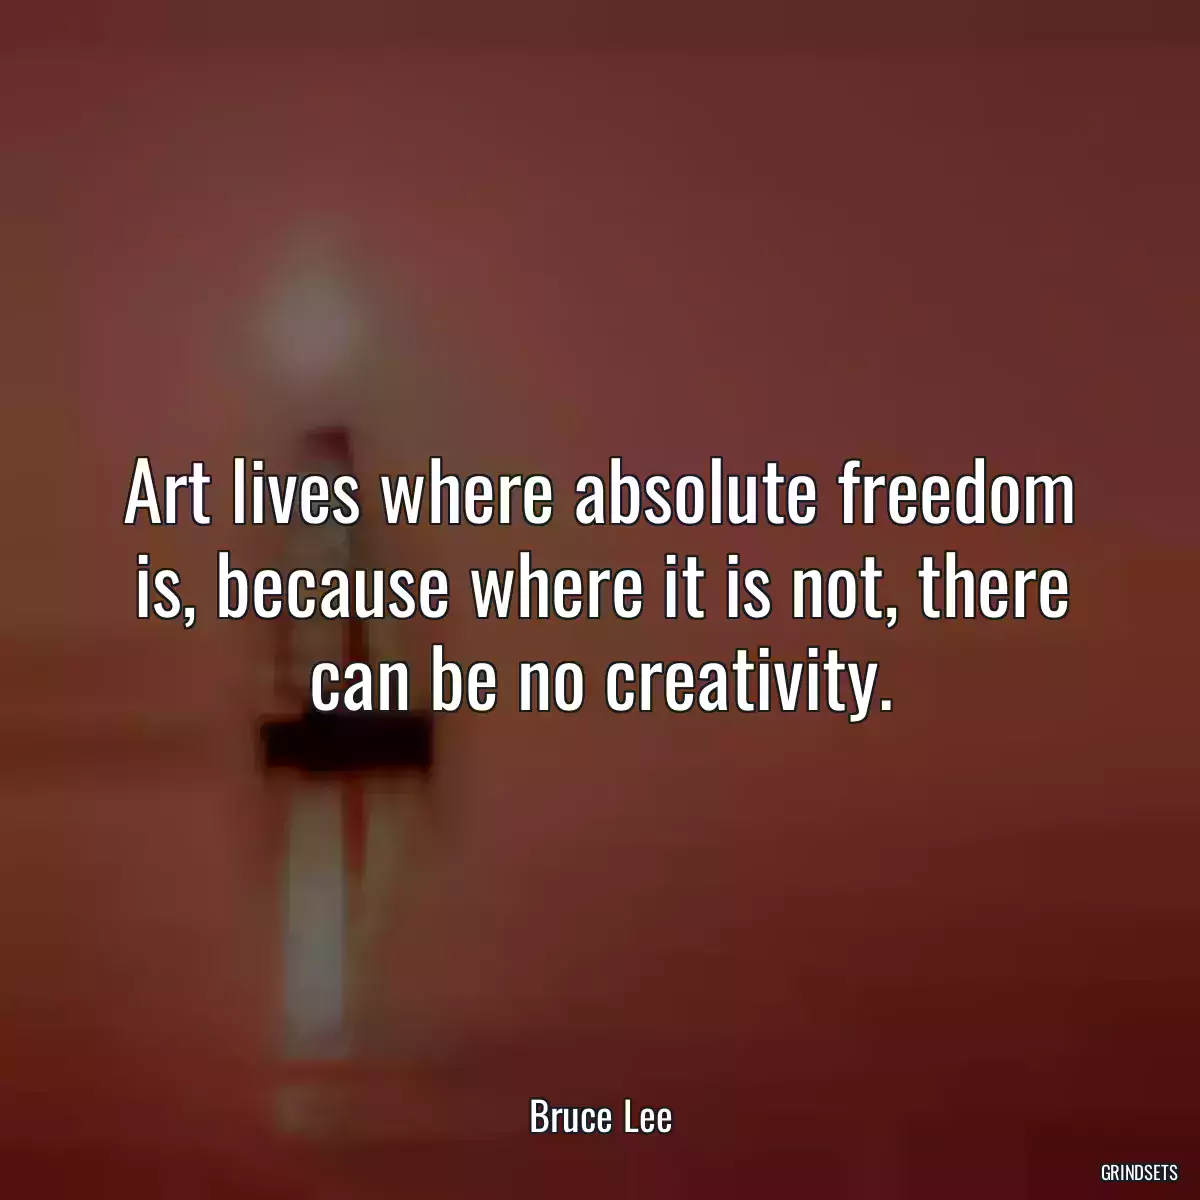 Art lives where absolute freedom is, because where it is not, there can be no creativity.